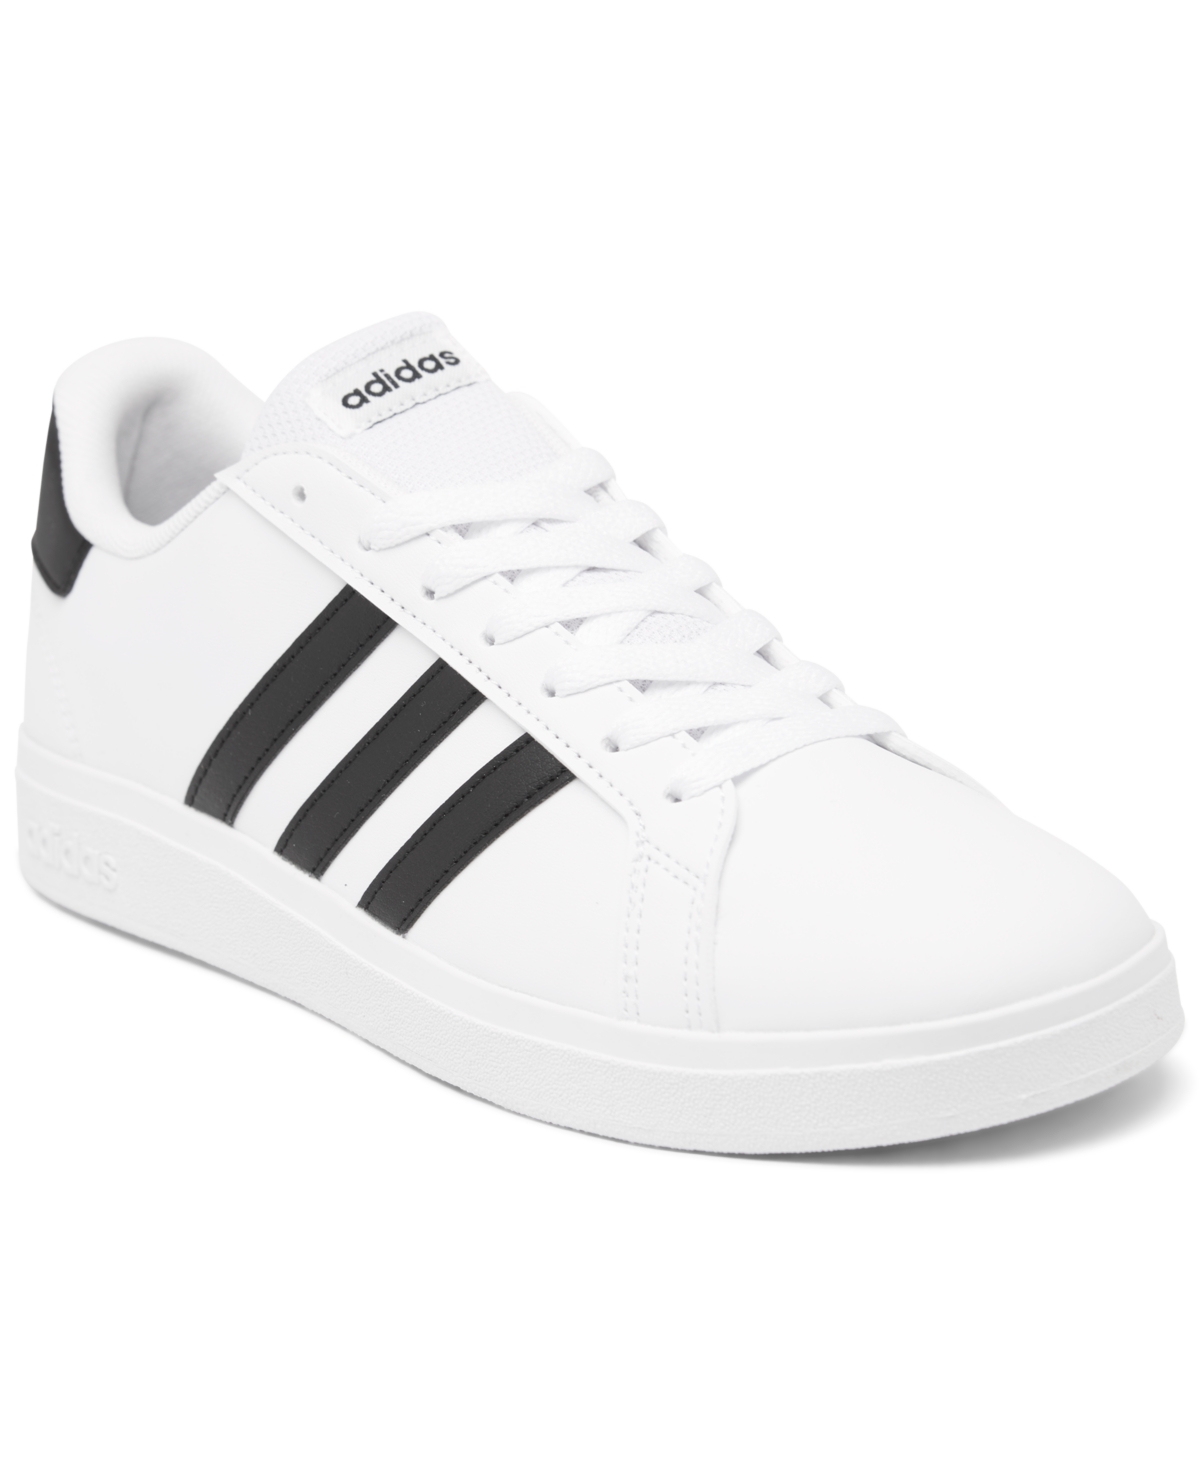 Adidas Originals Big Kids Grand Court Casual Sneakers From Finish Line In White,black